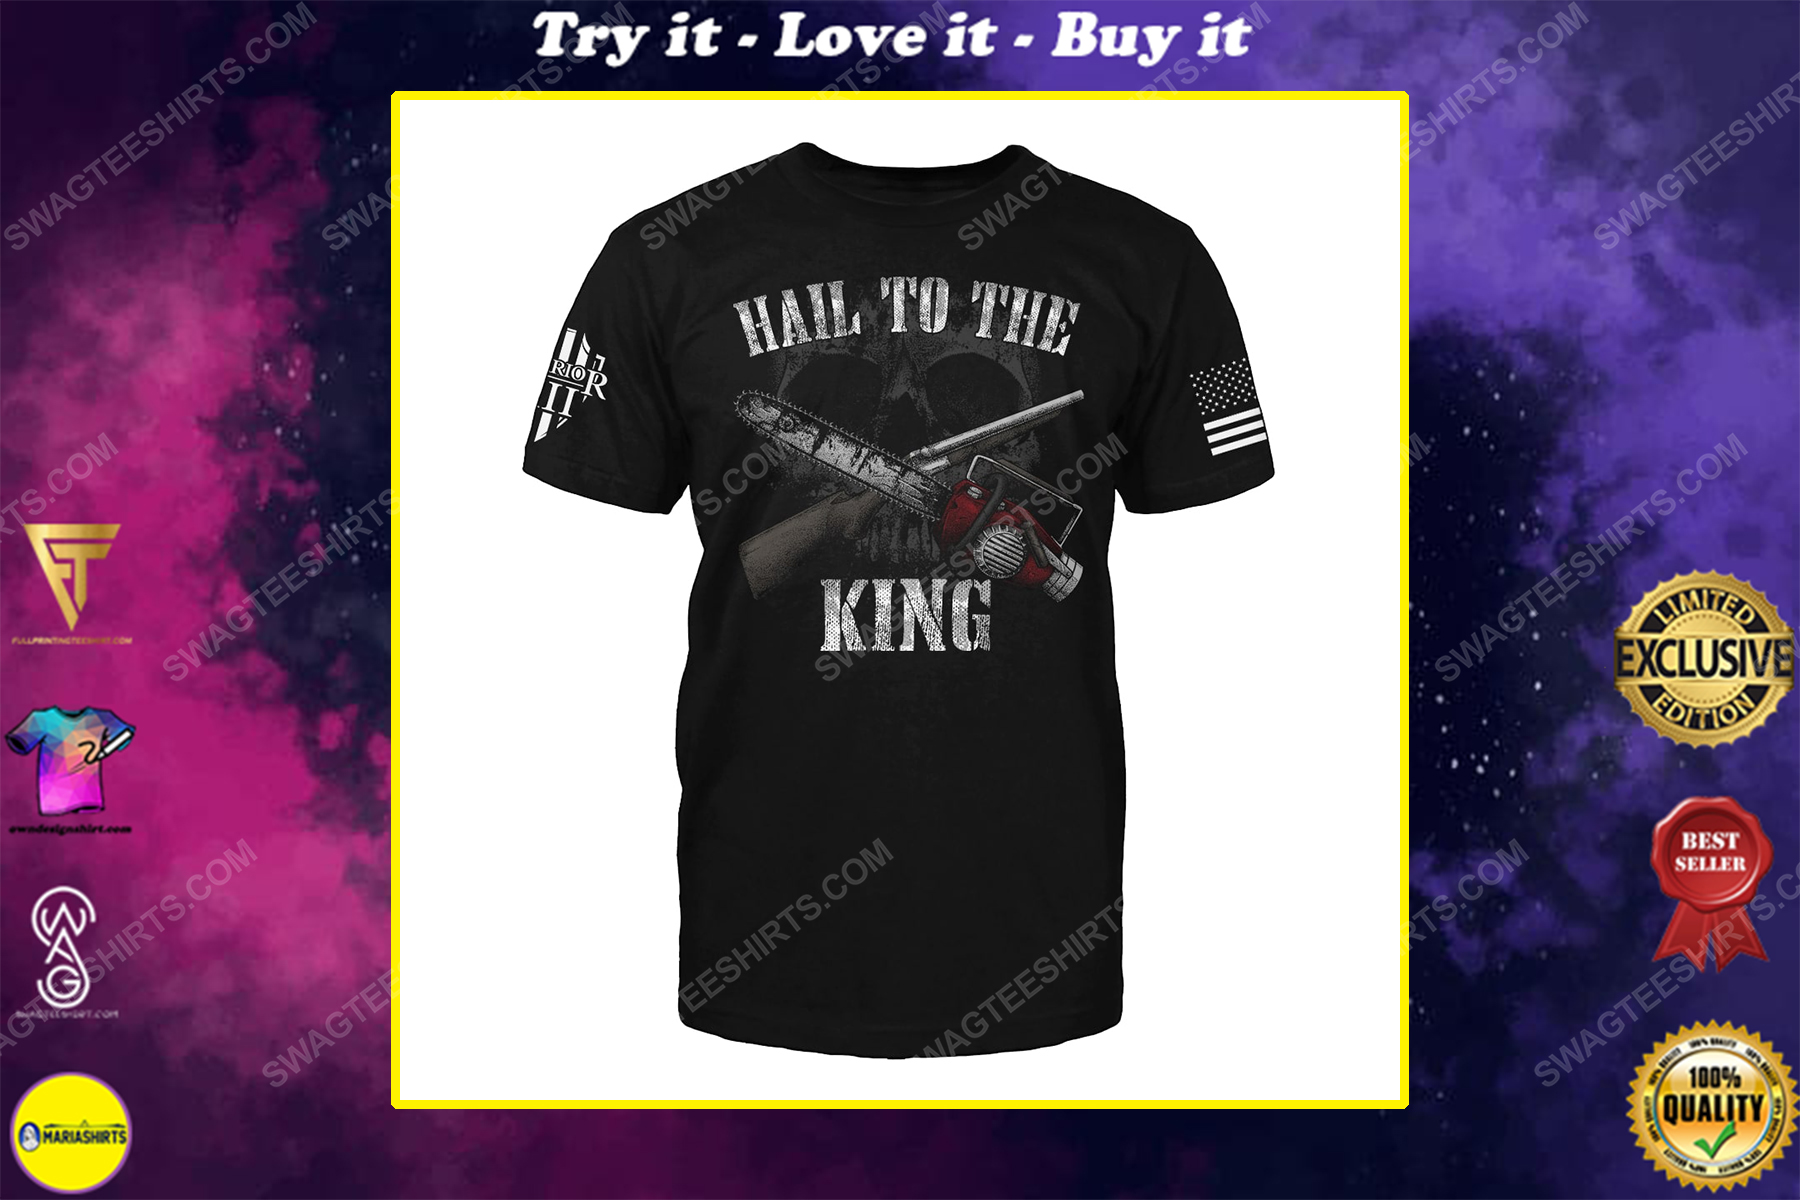 Hail to the king skull and saw shirt